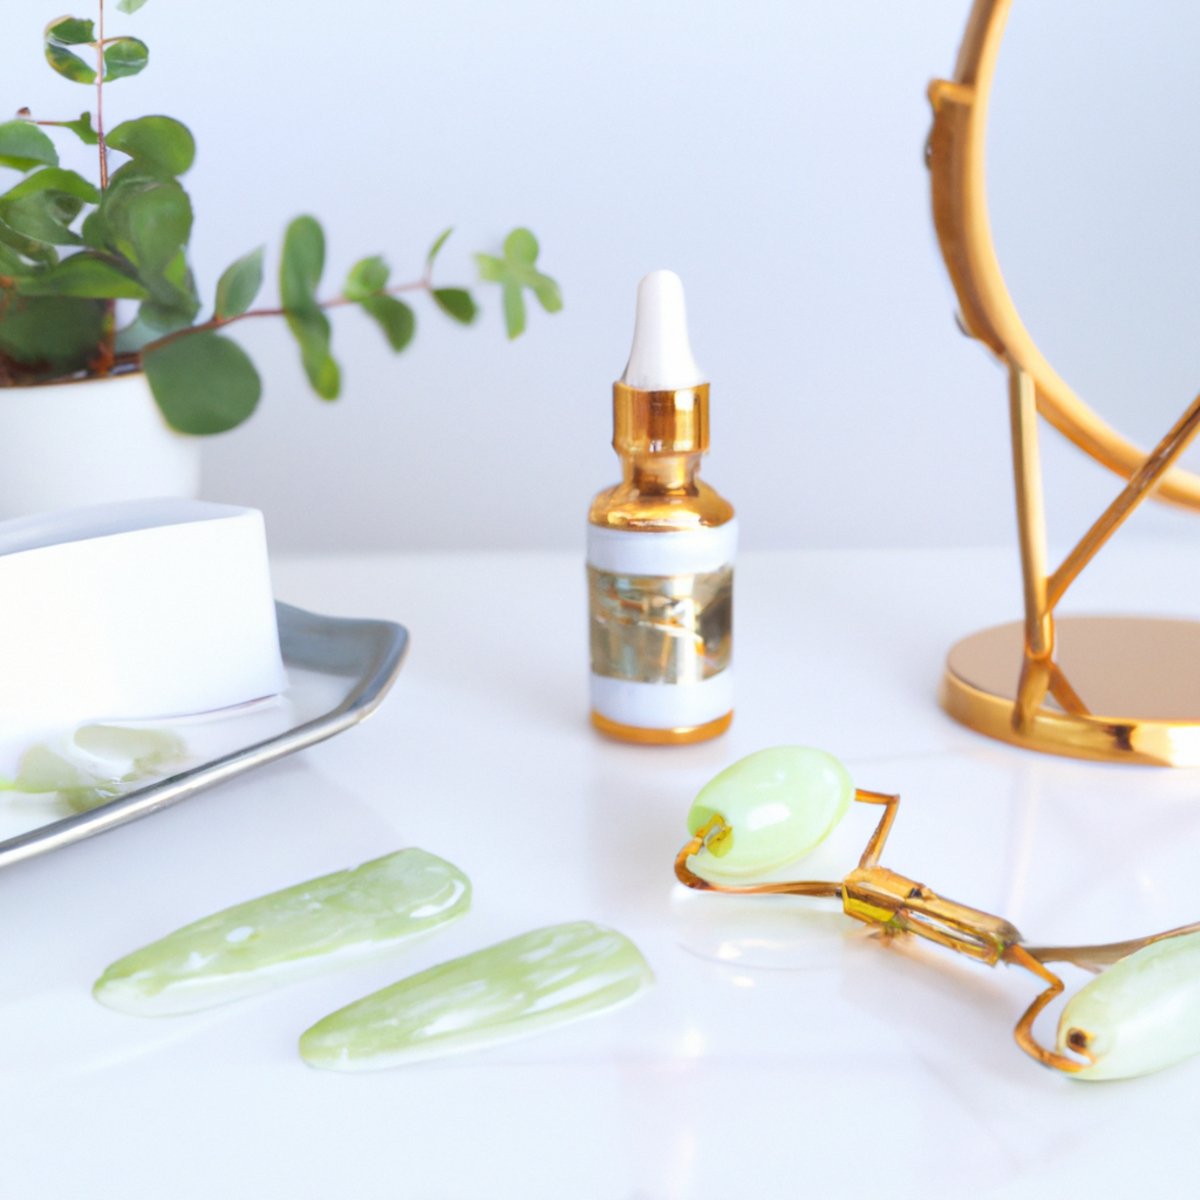 Unleash the Fountain of Youth with these Natural Skin Care Routines - because who needs a time machine when you have a jade roller and gold-plated facial massage tools?